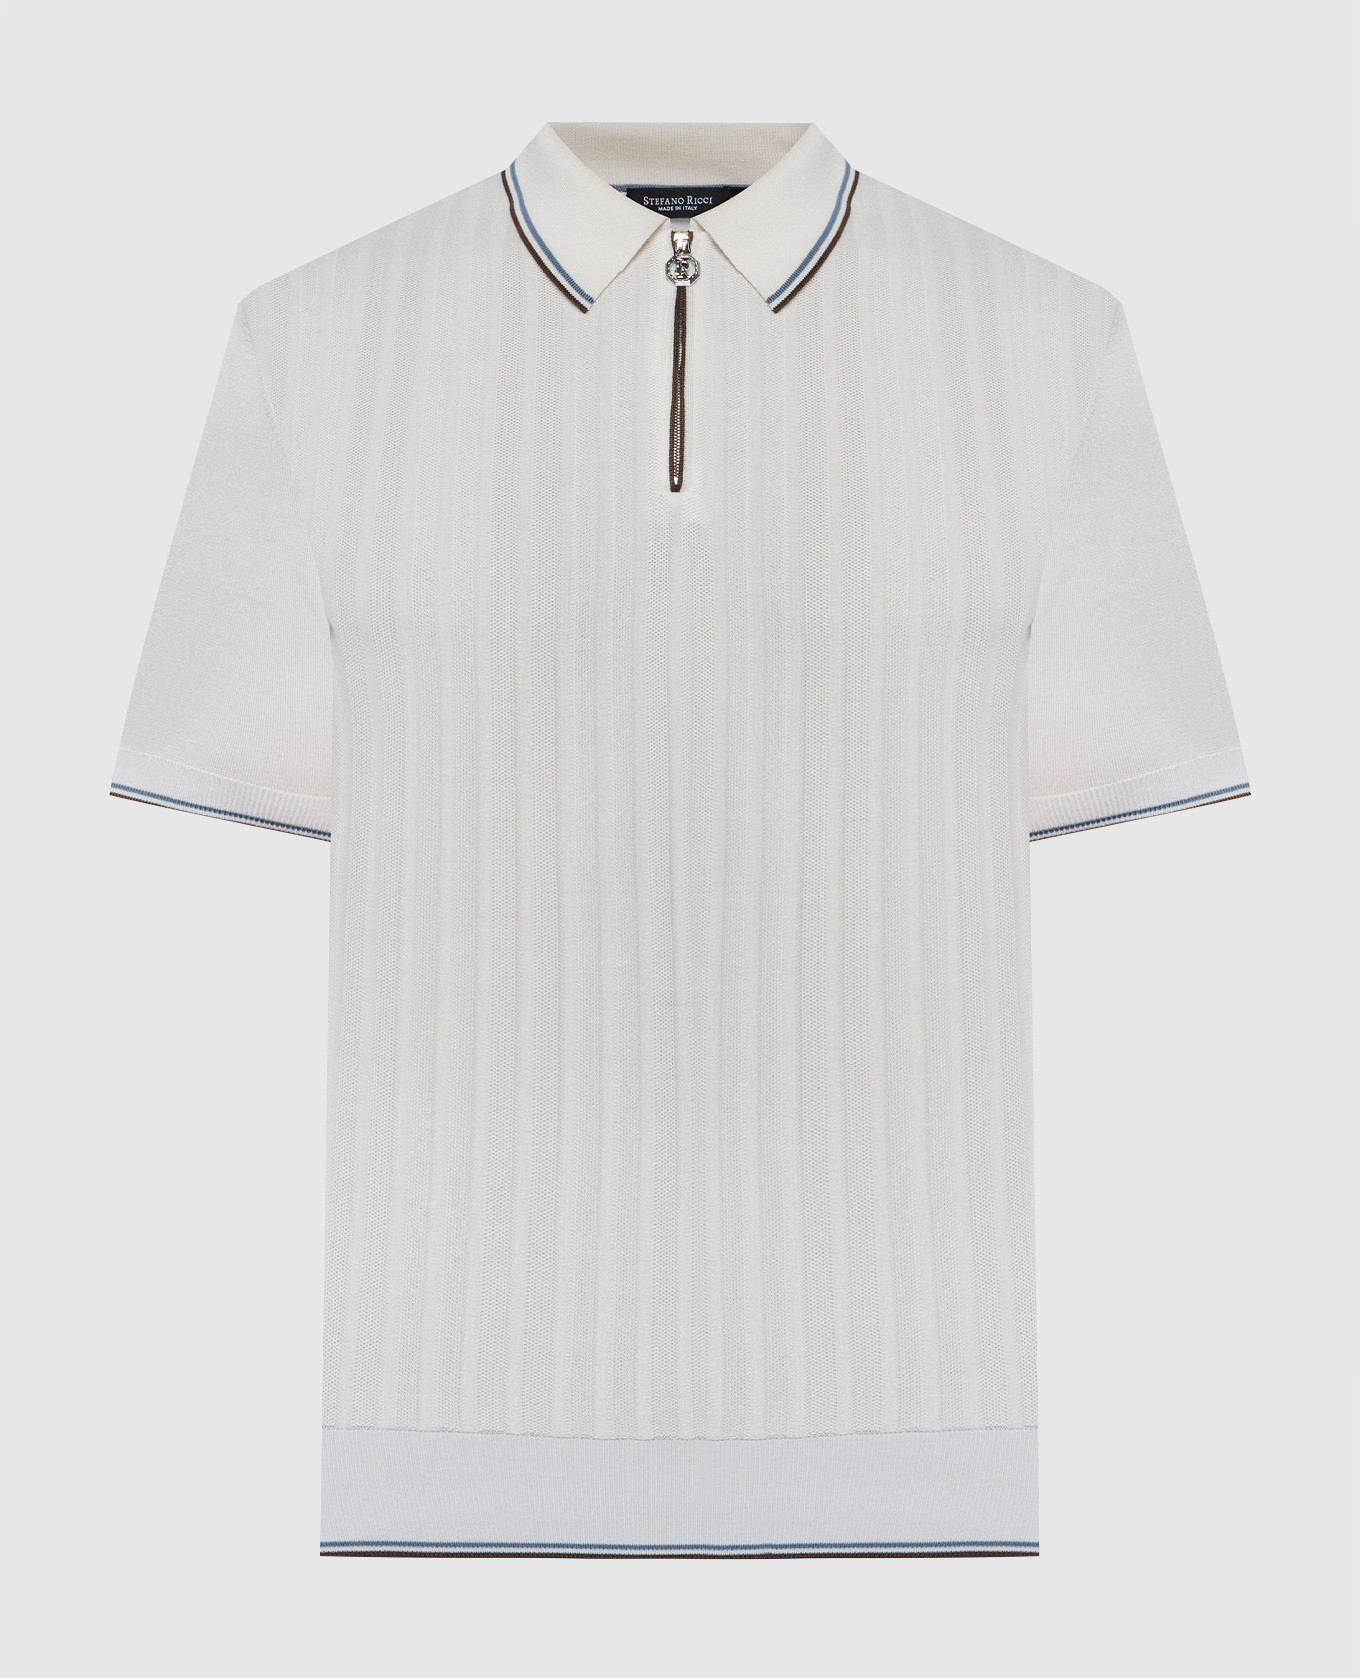 White polo with silk with a textured pattern